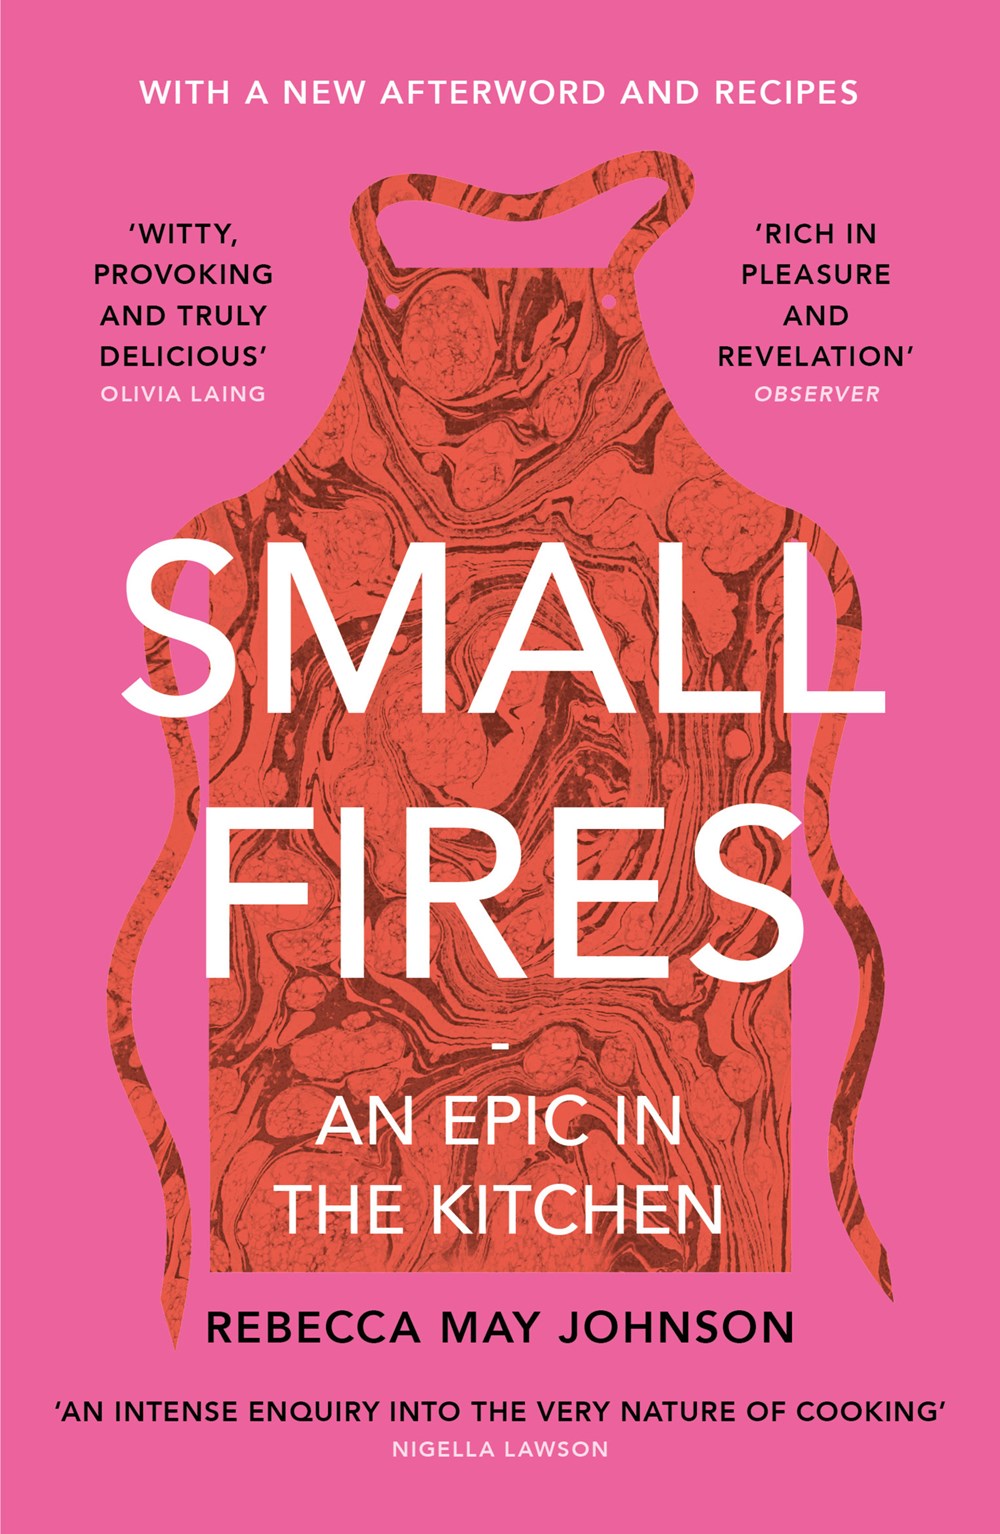 Small Fires: An Epic in the Kitchen by Rebecca May Johnson